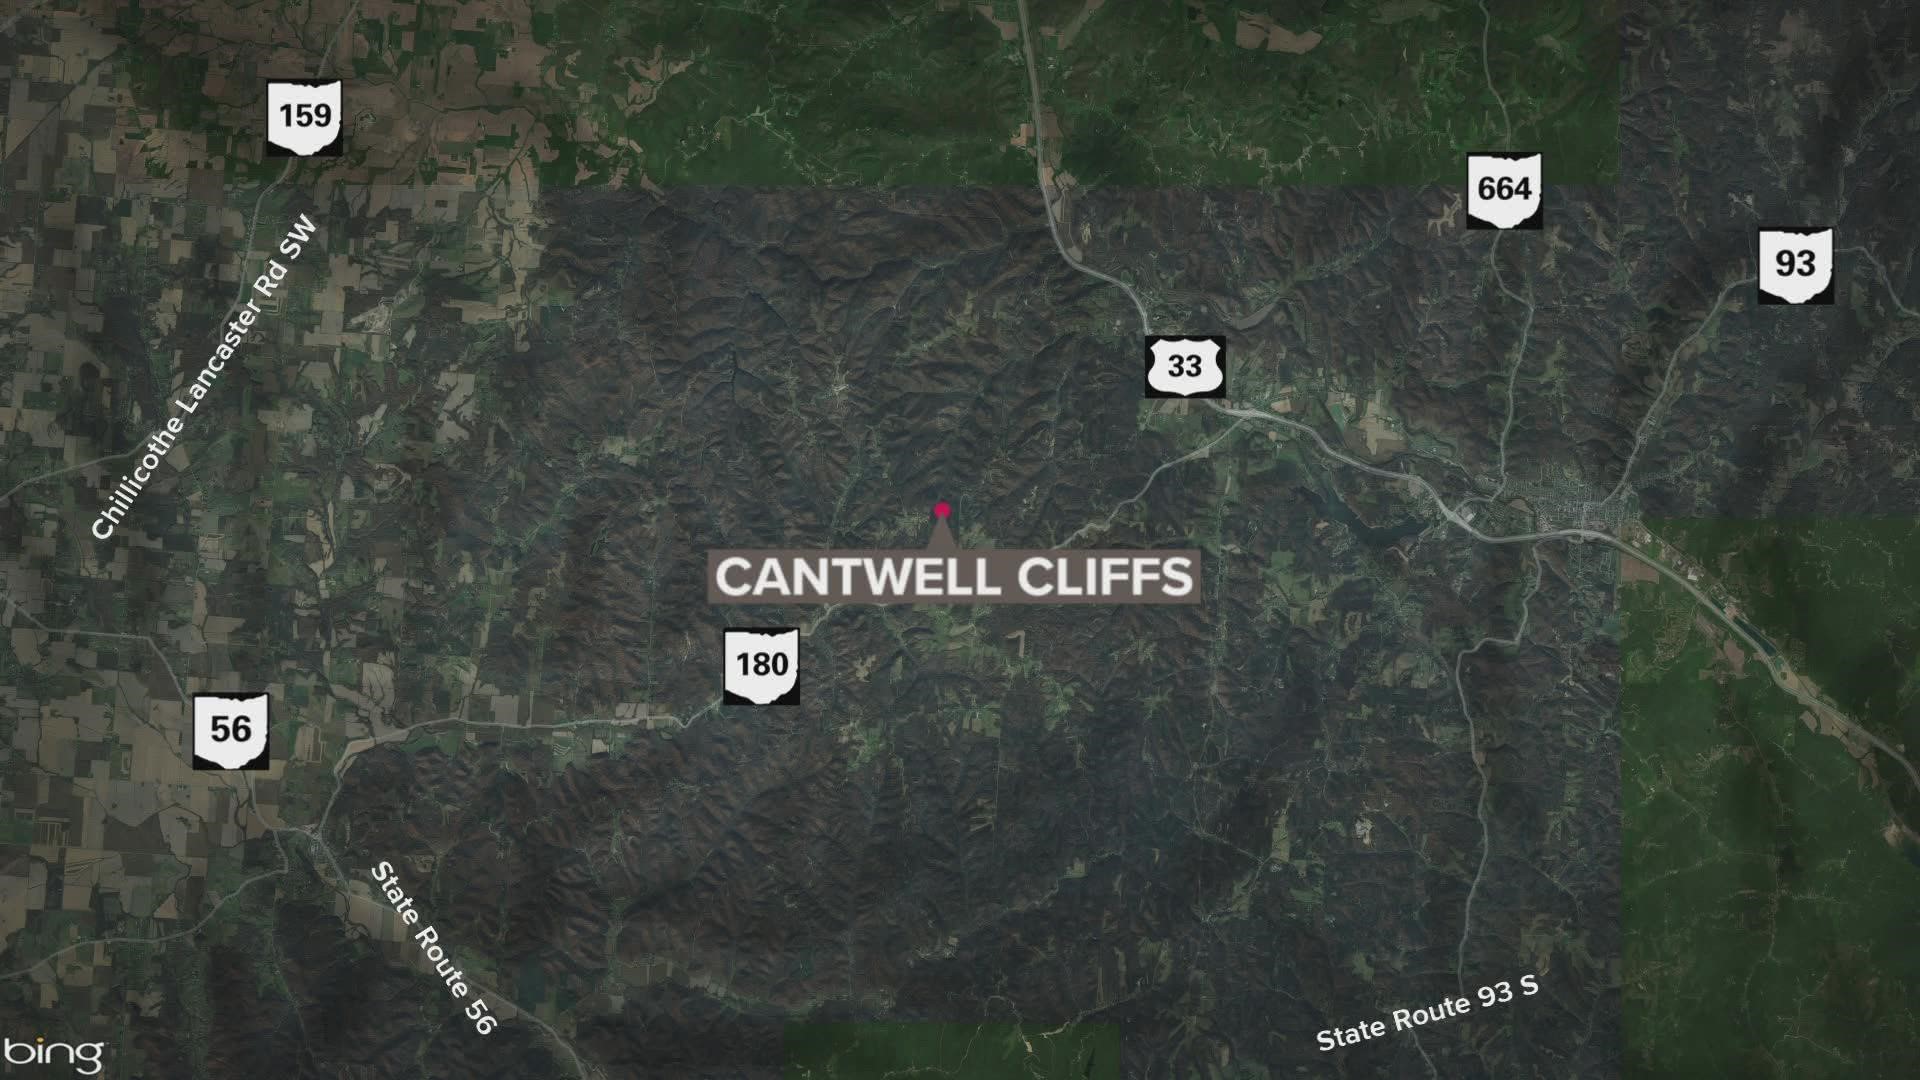 A camper found the person at the bottom of the cliff just before 6 p.m. on Wednesday.